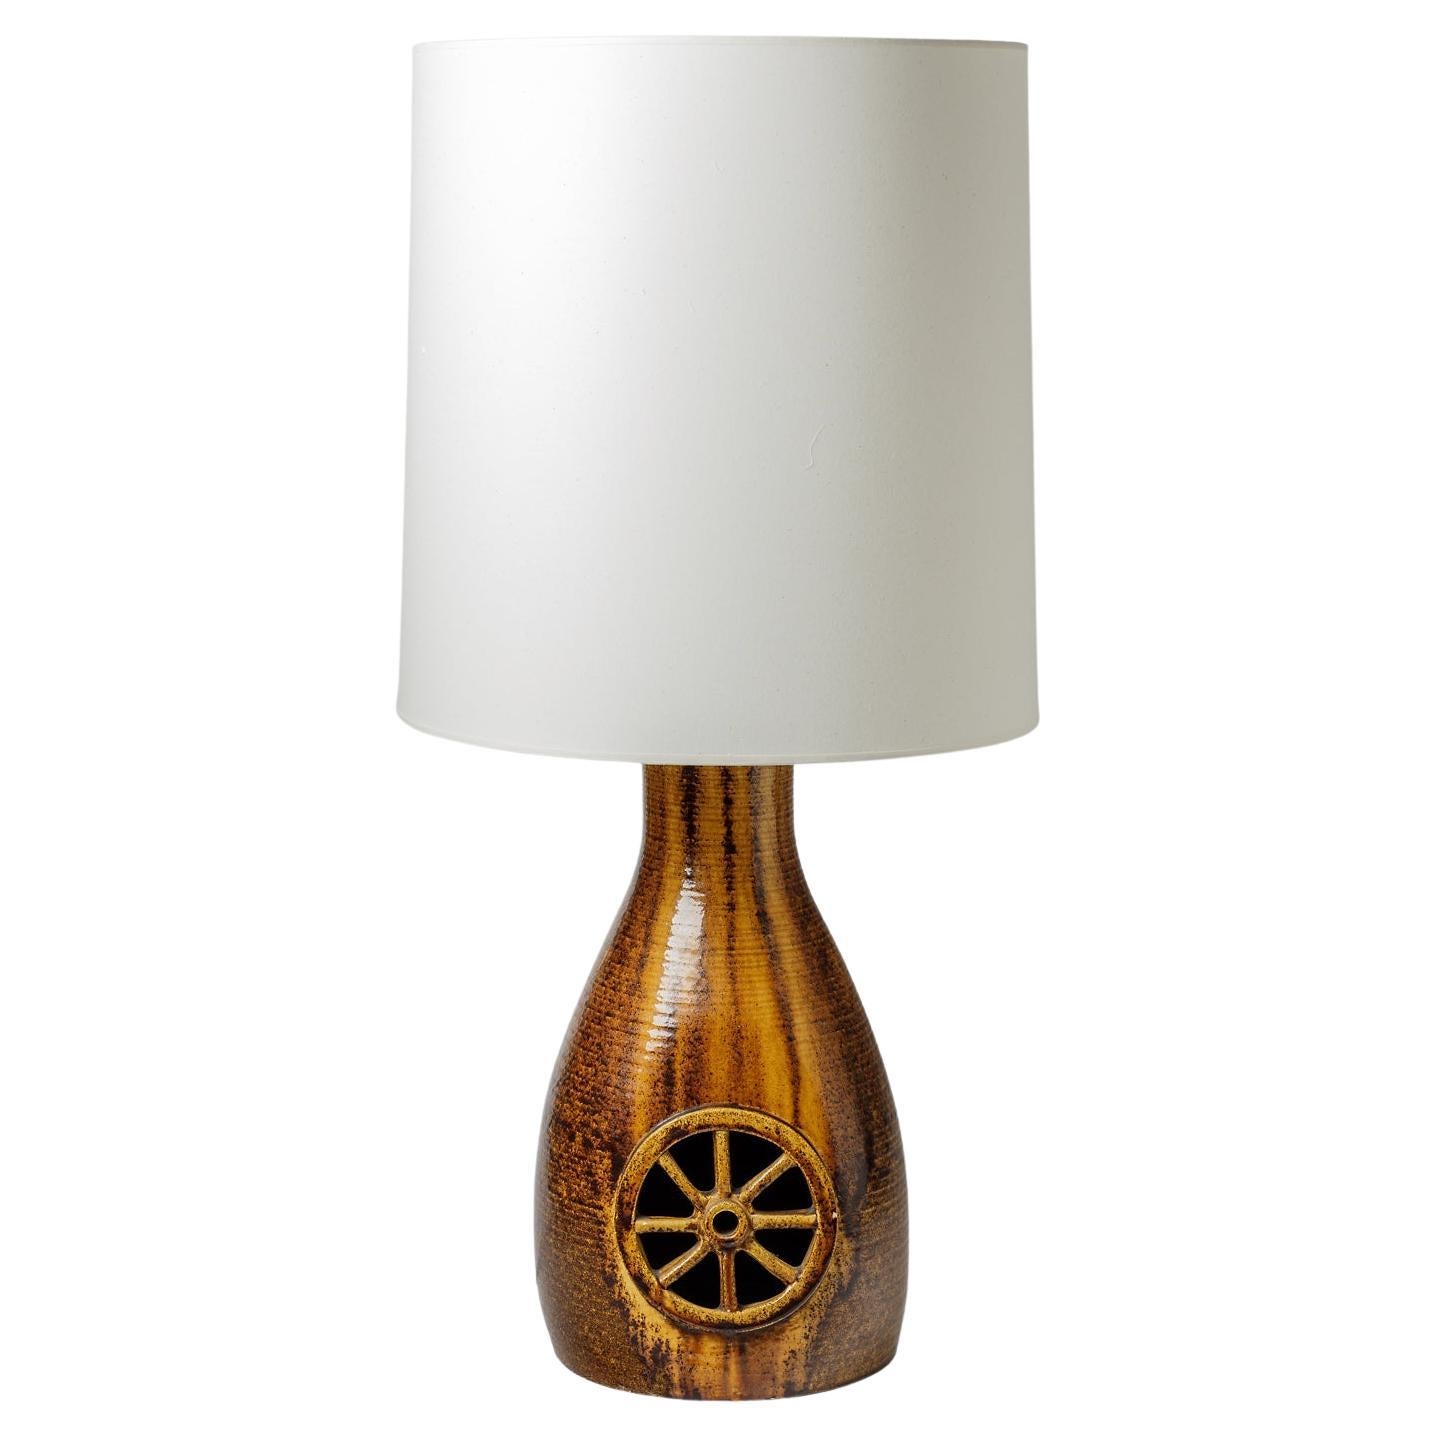 Glazed ceramic table lamp by Les potiers d’Accolay, circa 1960-1970 For Sale